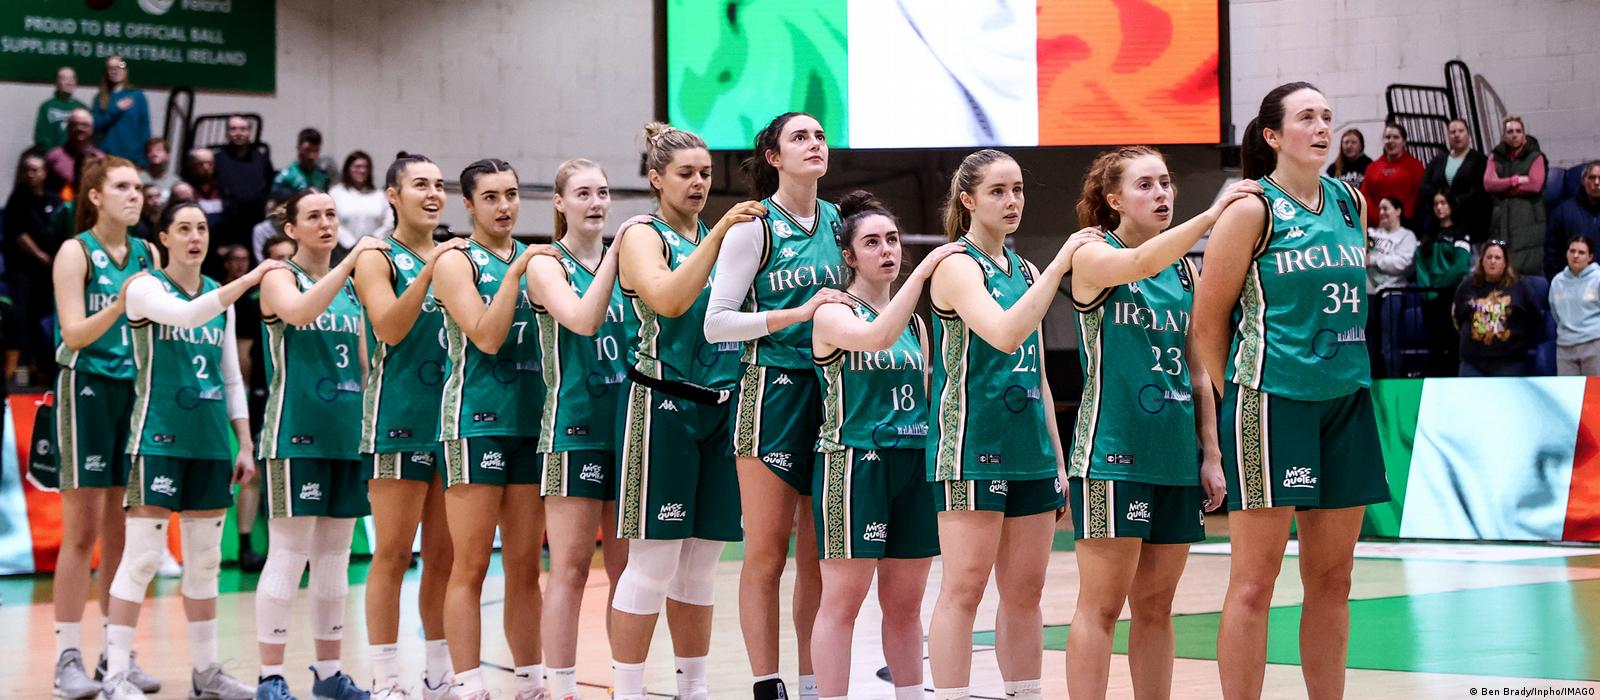 Irish basketball team refuses to shake hands with Israelis, proceeds to  lose by 30